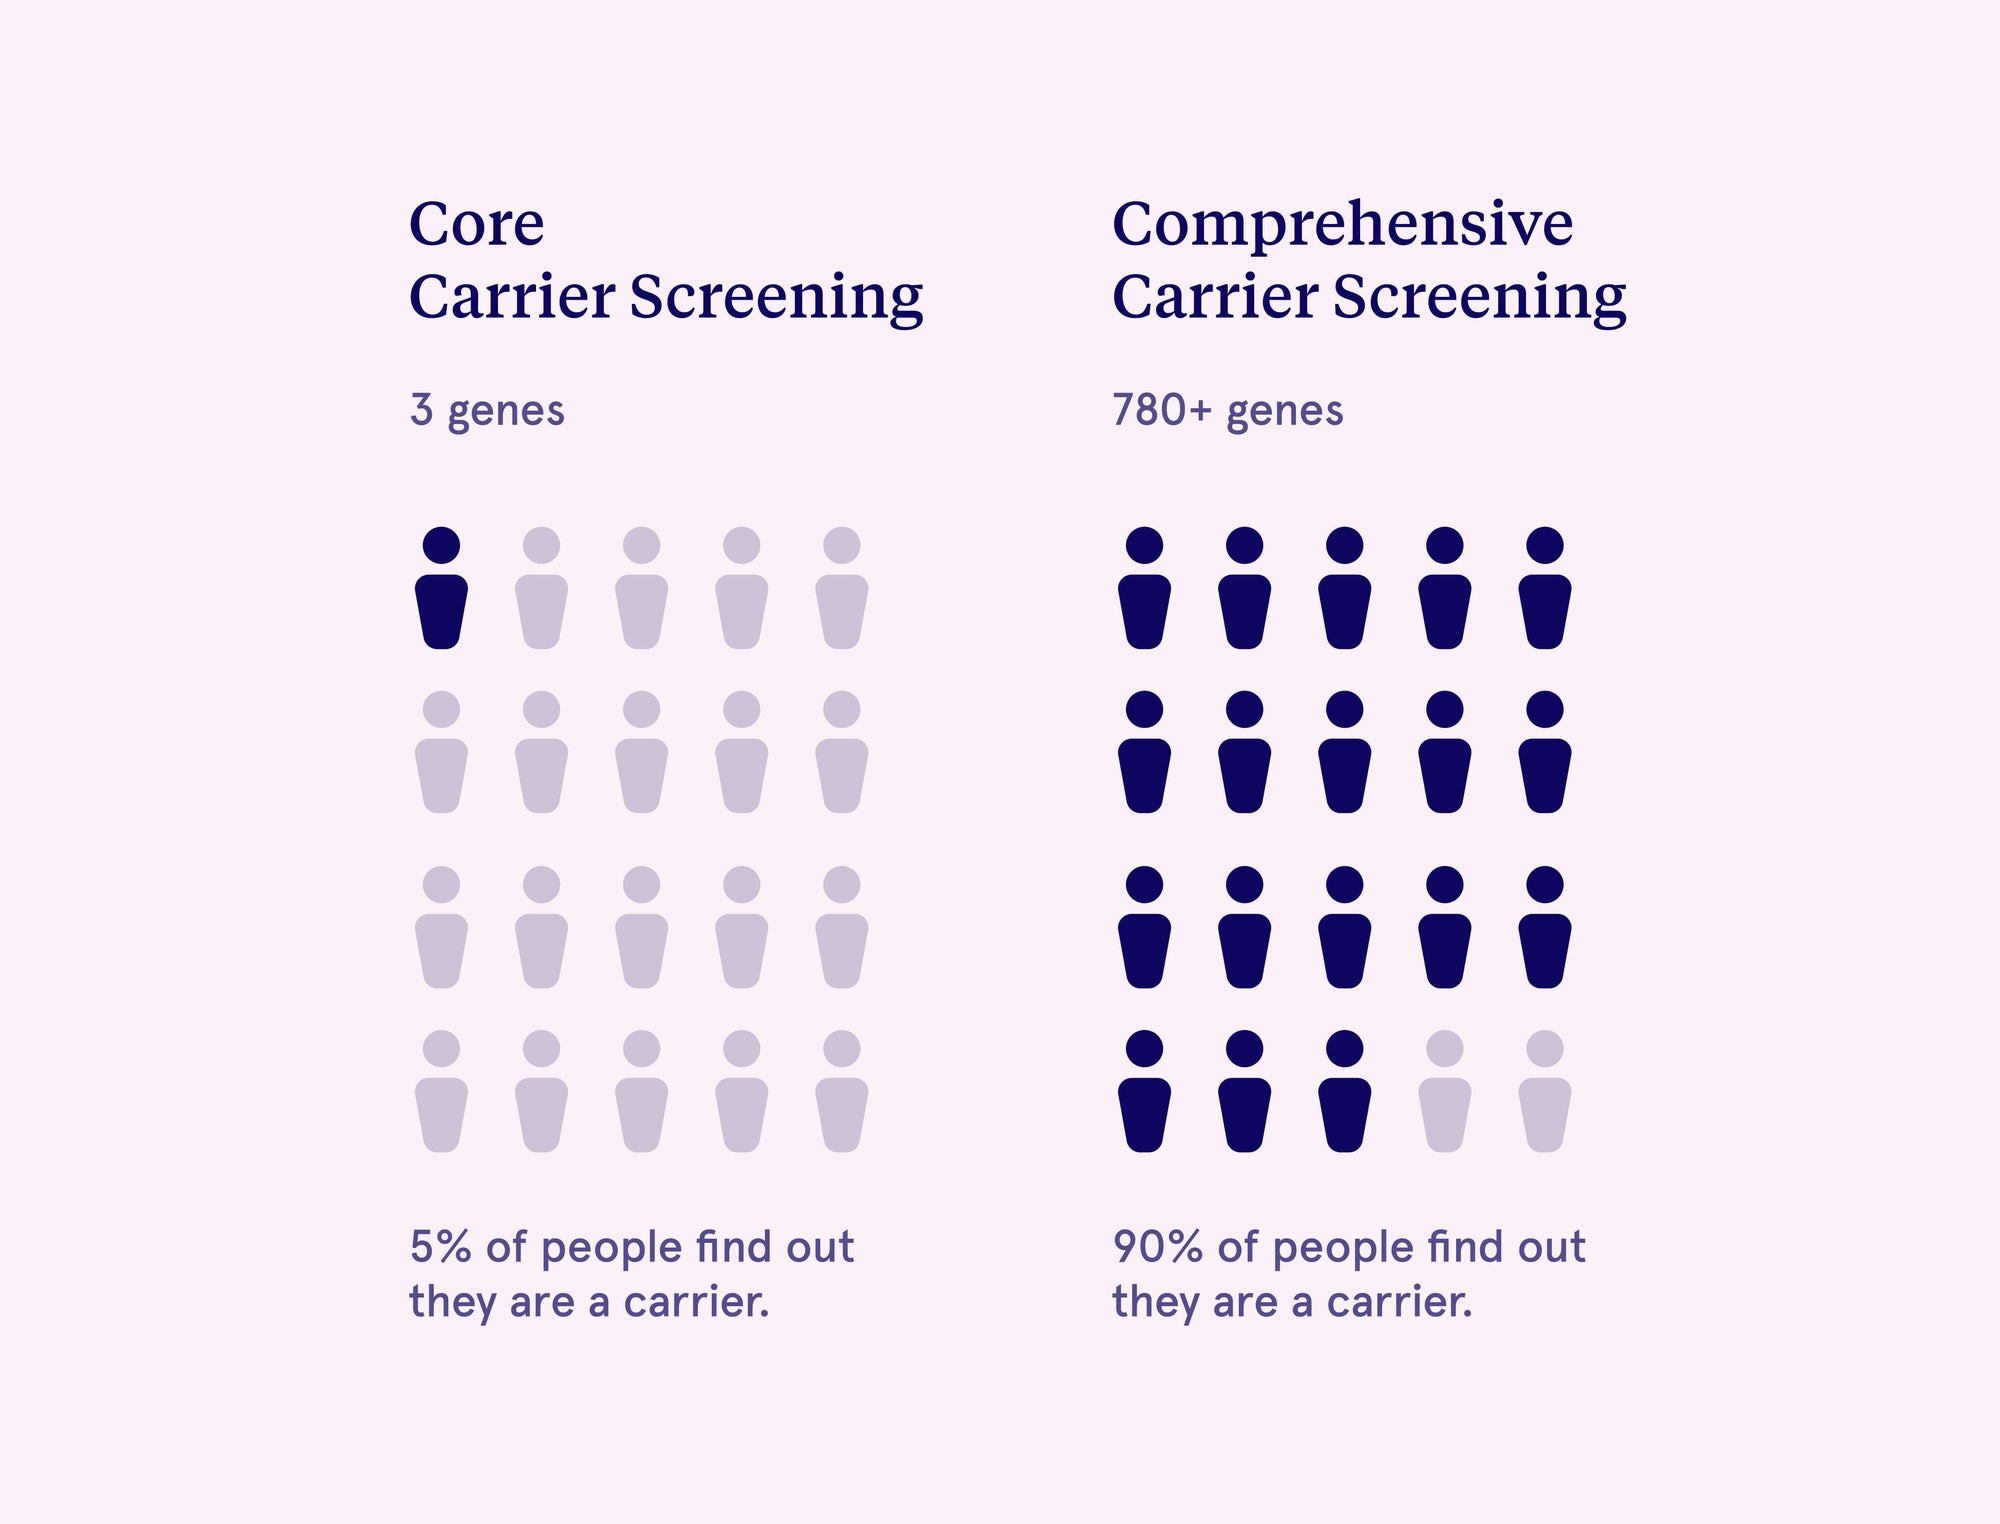 Comparison of Core Carrier Screening Test and Comprehensive Carrier Screening Test